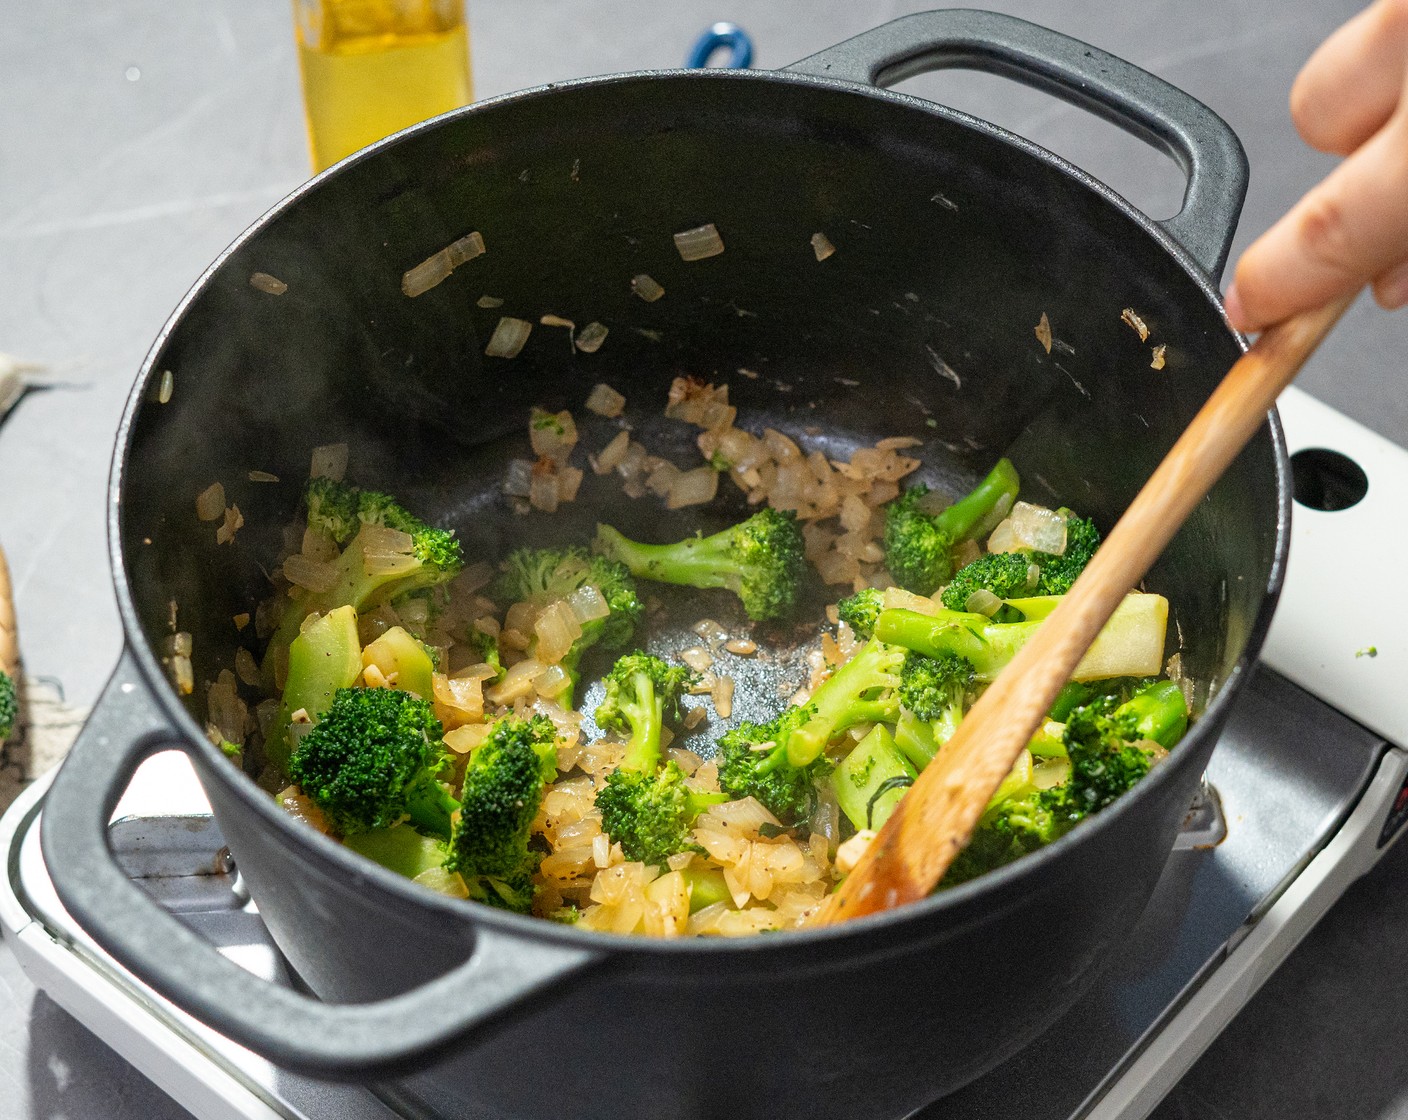 step 2 Add the Broccoli (1 head) and season with Salt (1/2 tsp) and Ground Black Pepper (1/2 tsp). Cook for 8-10 minutes, or until the broccoli is crisp and tender.